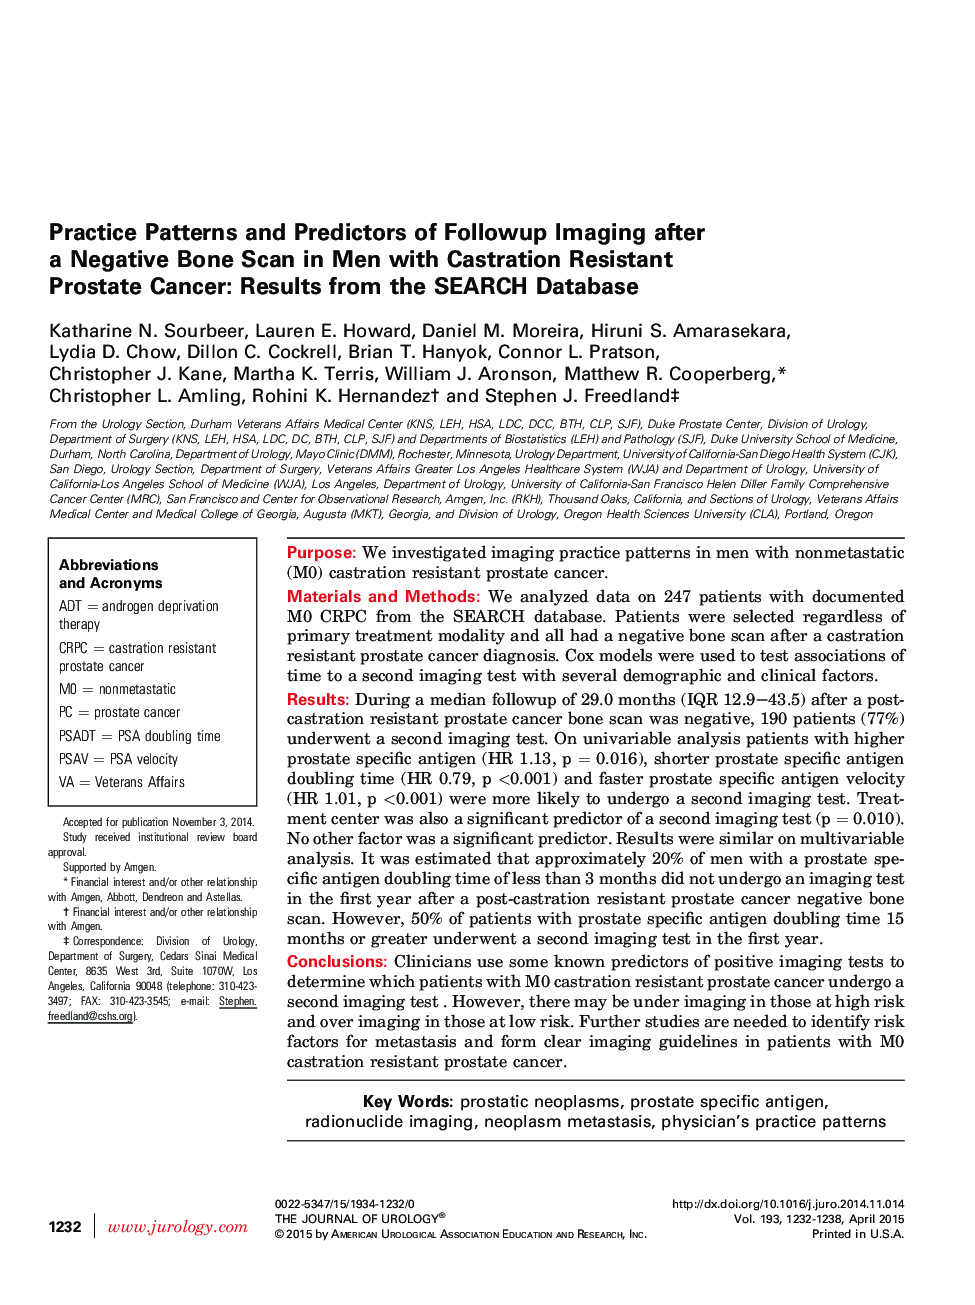 Practice Patterns and Predictors of Followup Imaging after a Negative Bone Scan in Men with Castration Resistant Prostate Cancer: Results from the SEARCH Database 